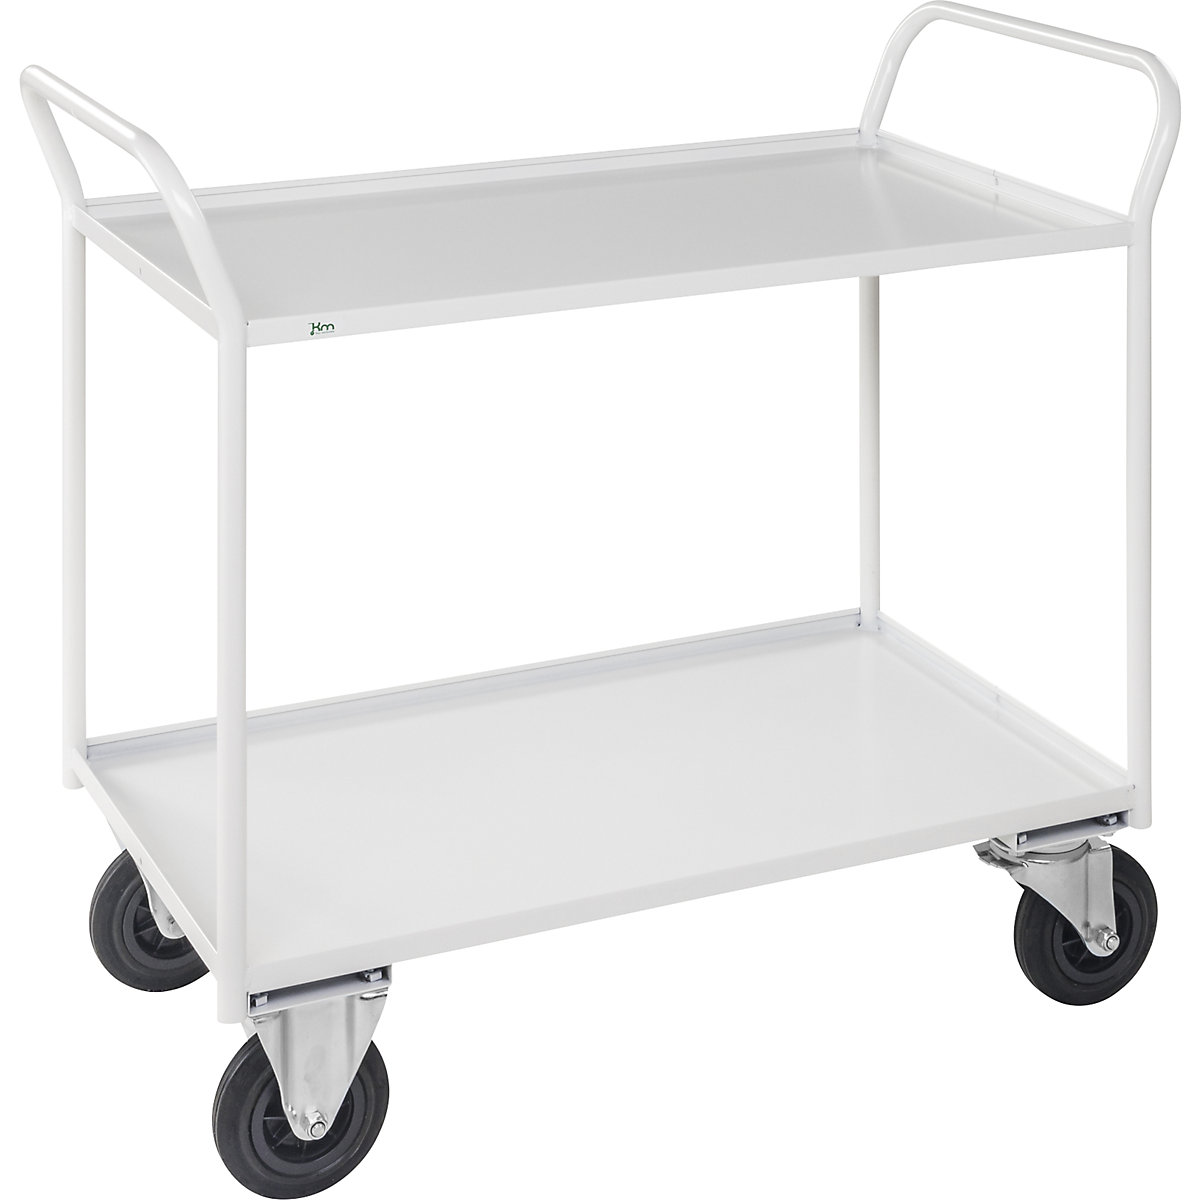 KM41 table trolley – Kongamek, 2 shelves with raised edges, LxWxH 1080 x 450 x 1000 mm, white, 2 swivel castors and 2 fixed castors, 5+ items-6